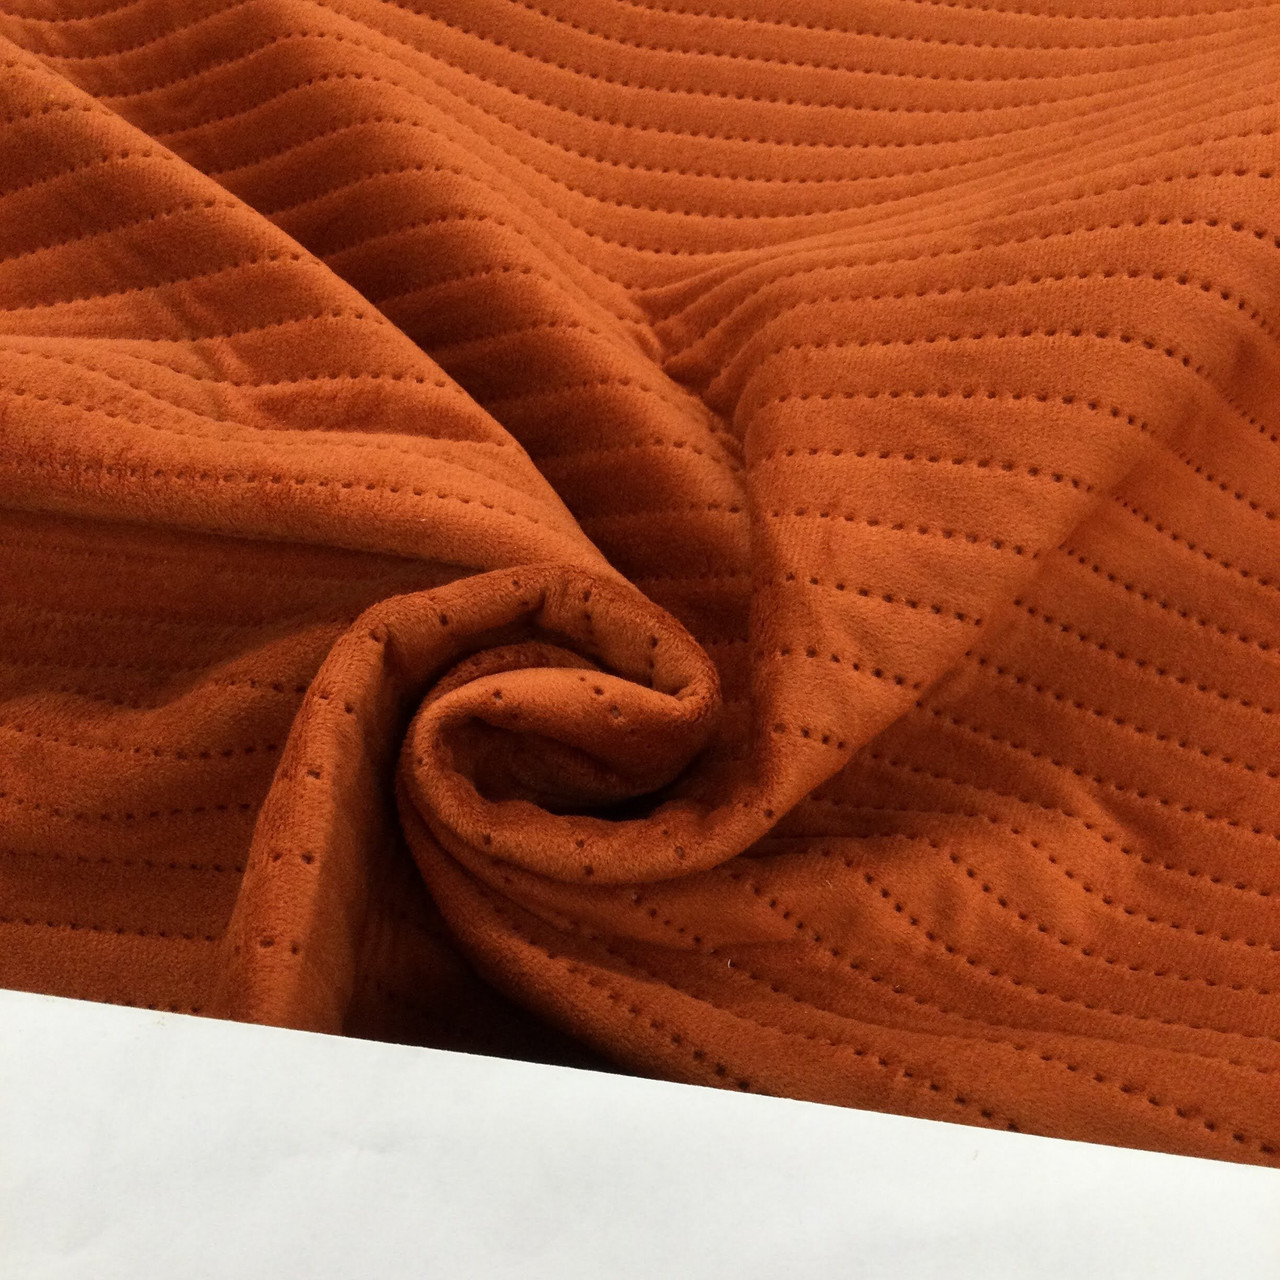 Fabric Mart Direct Rust Orange, Gray Poly Viscose Fabric By The Yard, 55  inches or 140 cm width, 1 Yard Gray Velvet Fabric, Rusty Stripes,  Upholstery Drapery Curtain Wholesale Fabric, Window Treatment 